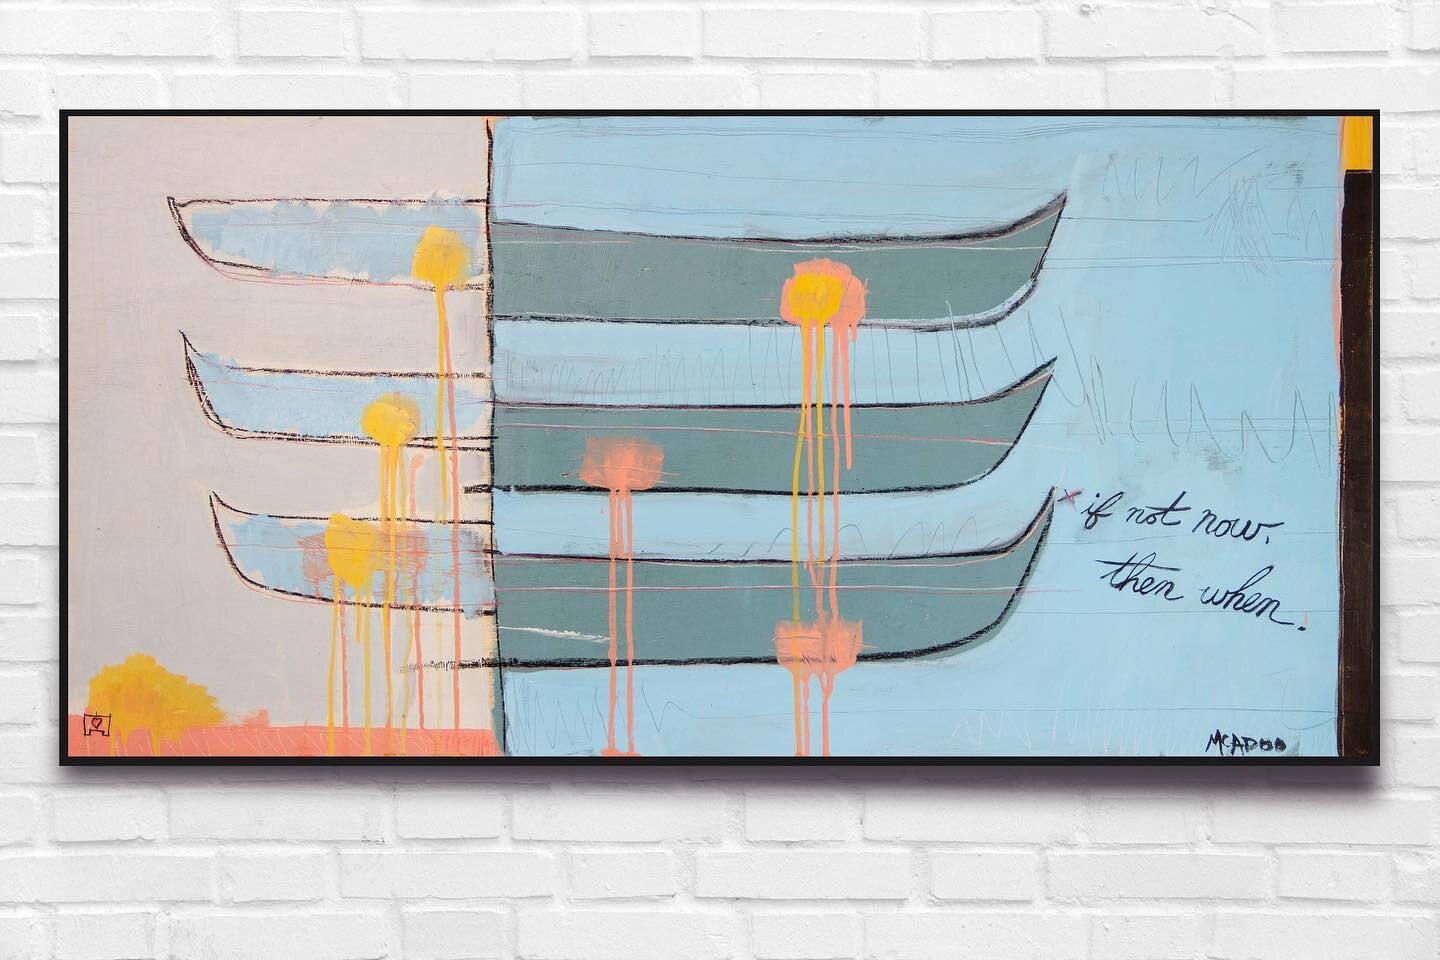 This piece is long gone but it&rsquo;s one of my favorites.
.
&ldquo;If Not Now, then When?&rdquo;, 48&rdquo; x 24&rdquo;, acrylic/mixed media on wood panel. SOLD thx to the incredible crew at @artandlightgallery . Oh, and did I mention I&rsquo;m bri